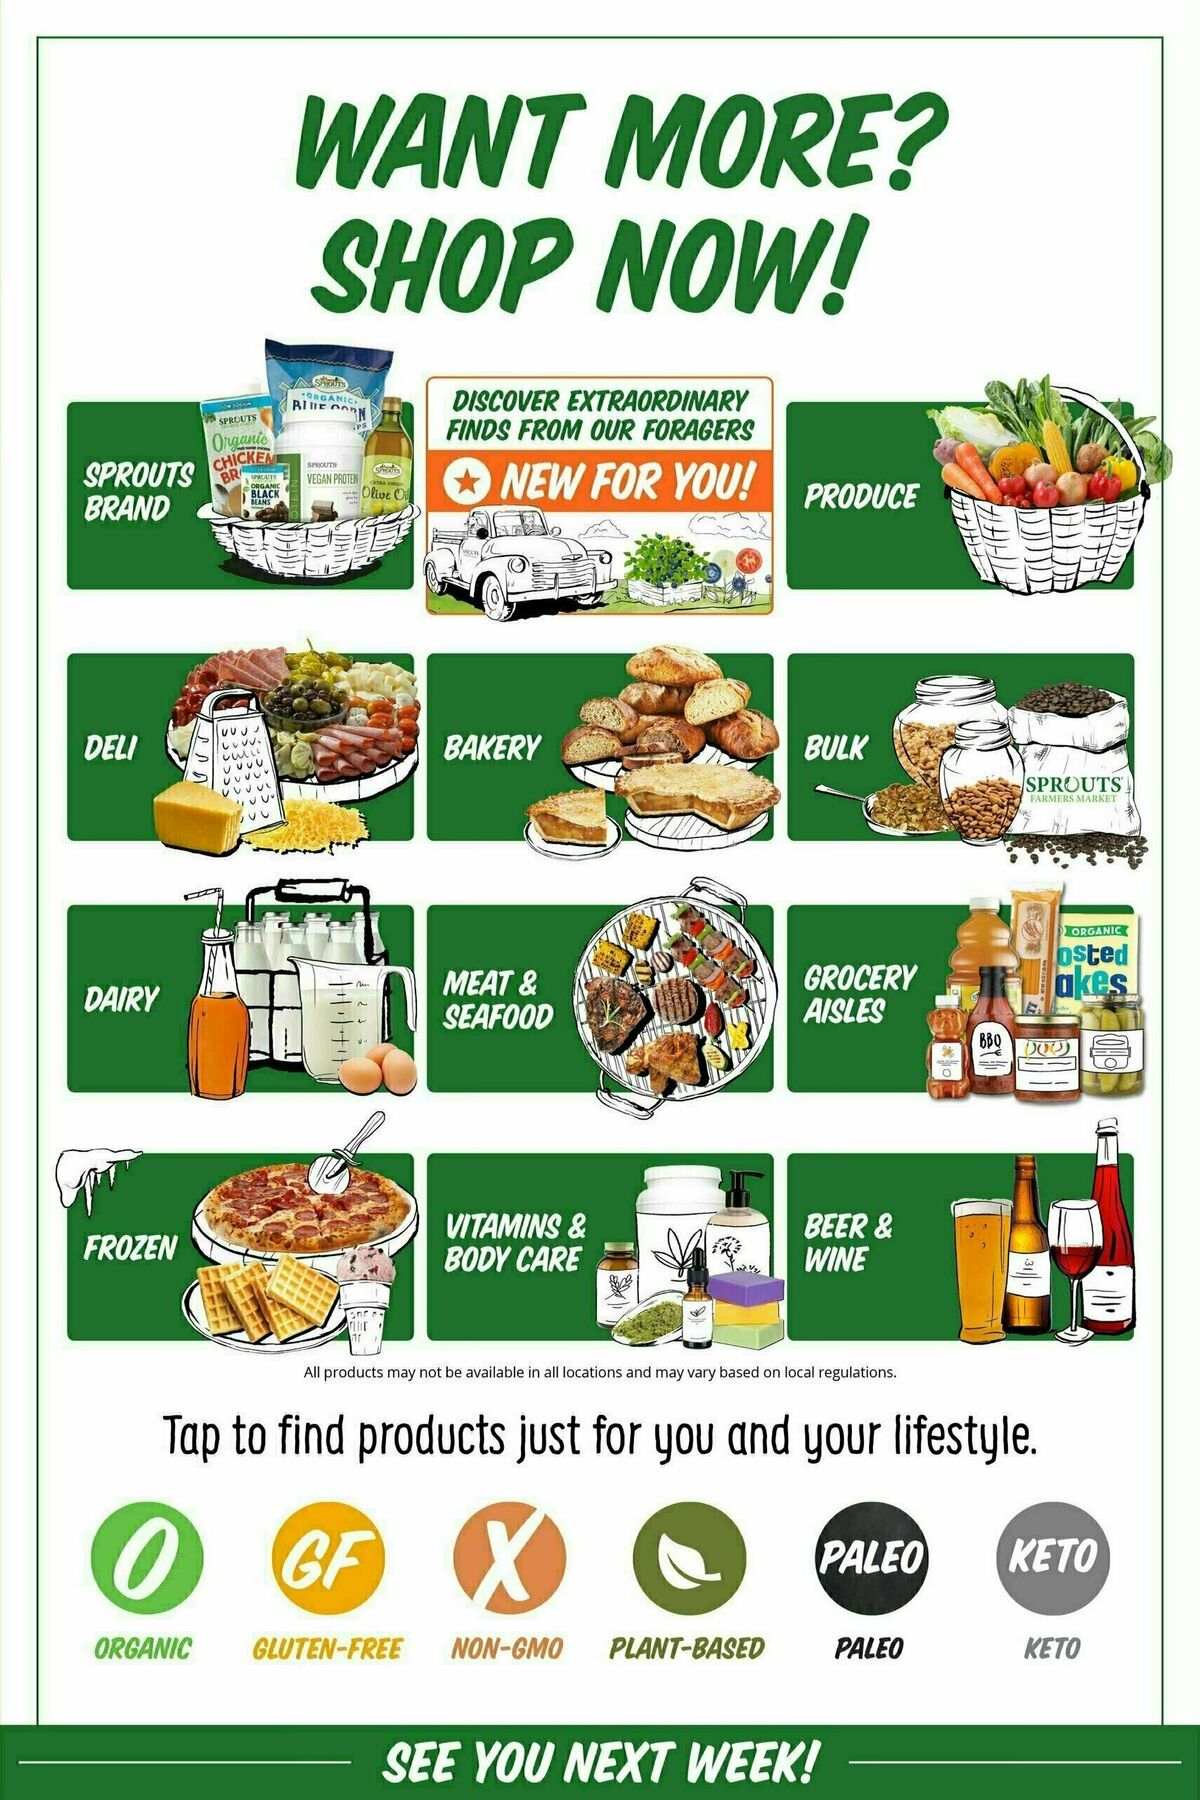 Sprouts Farmers Market Weekly Ad from December 27